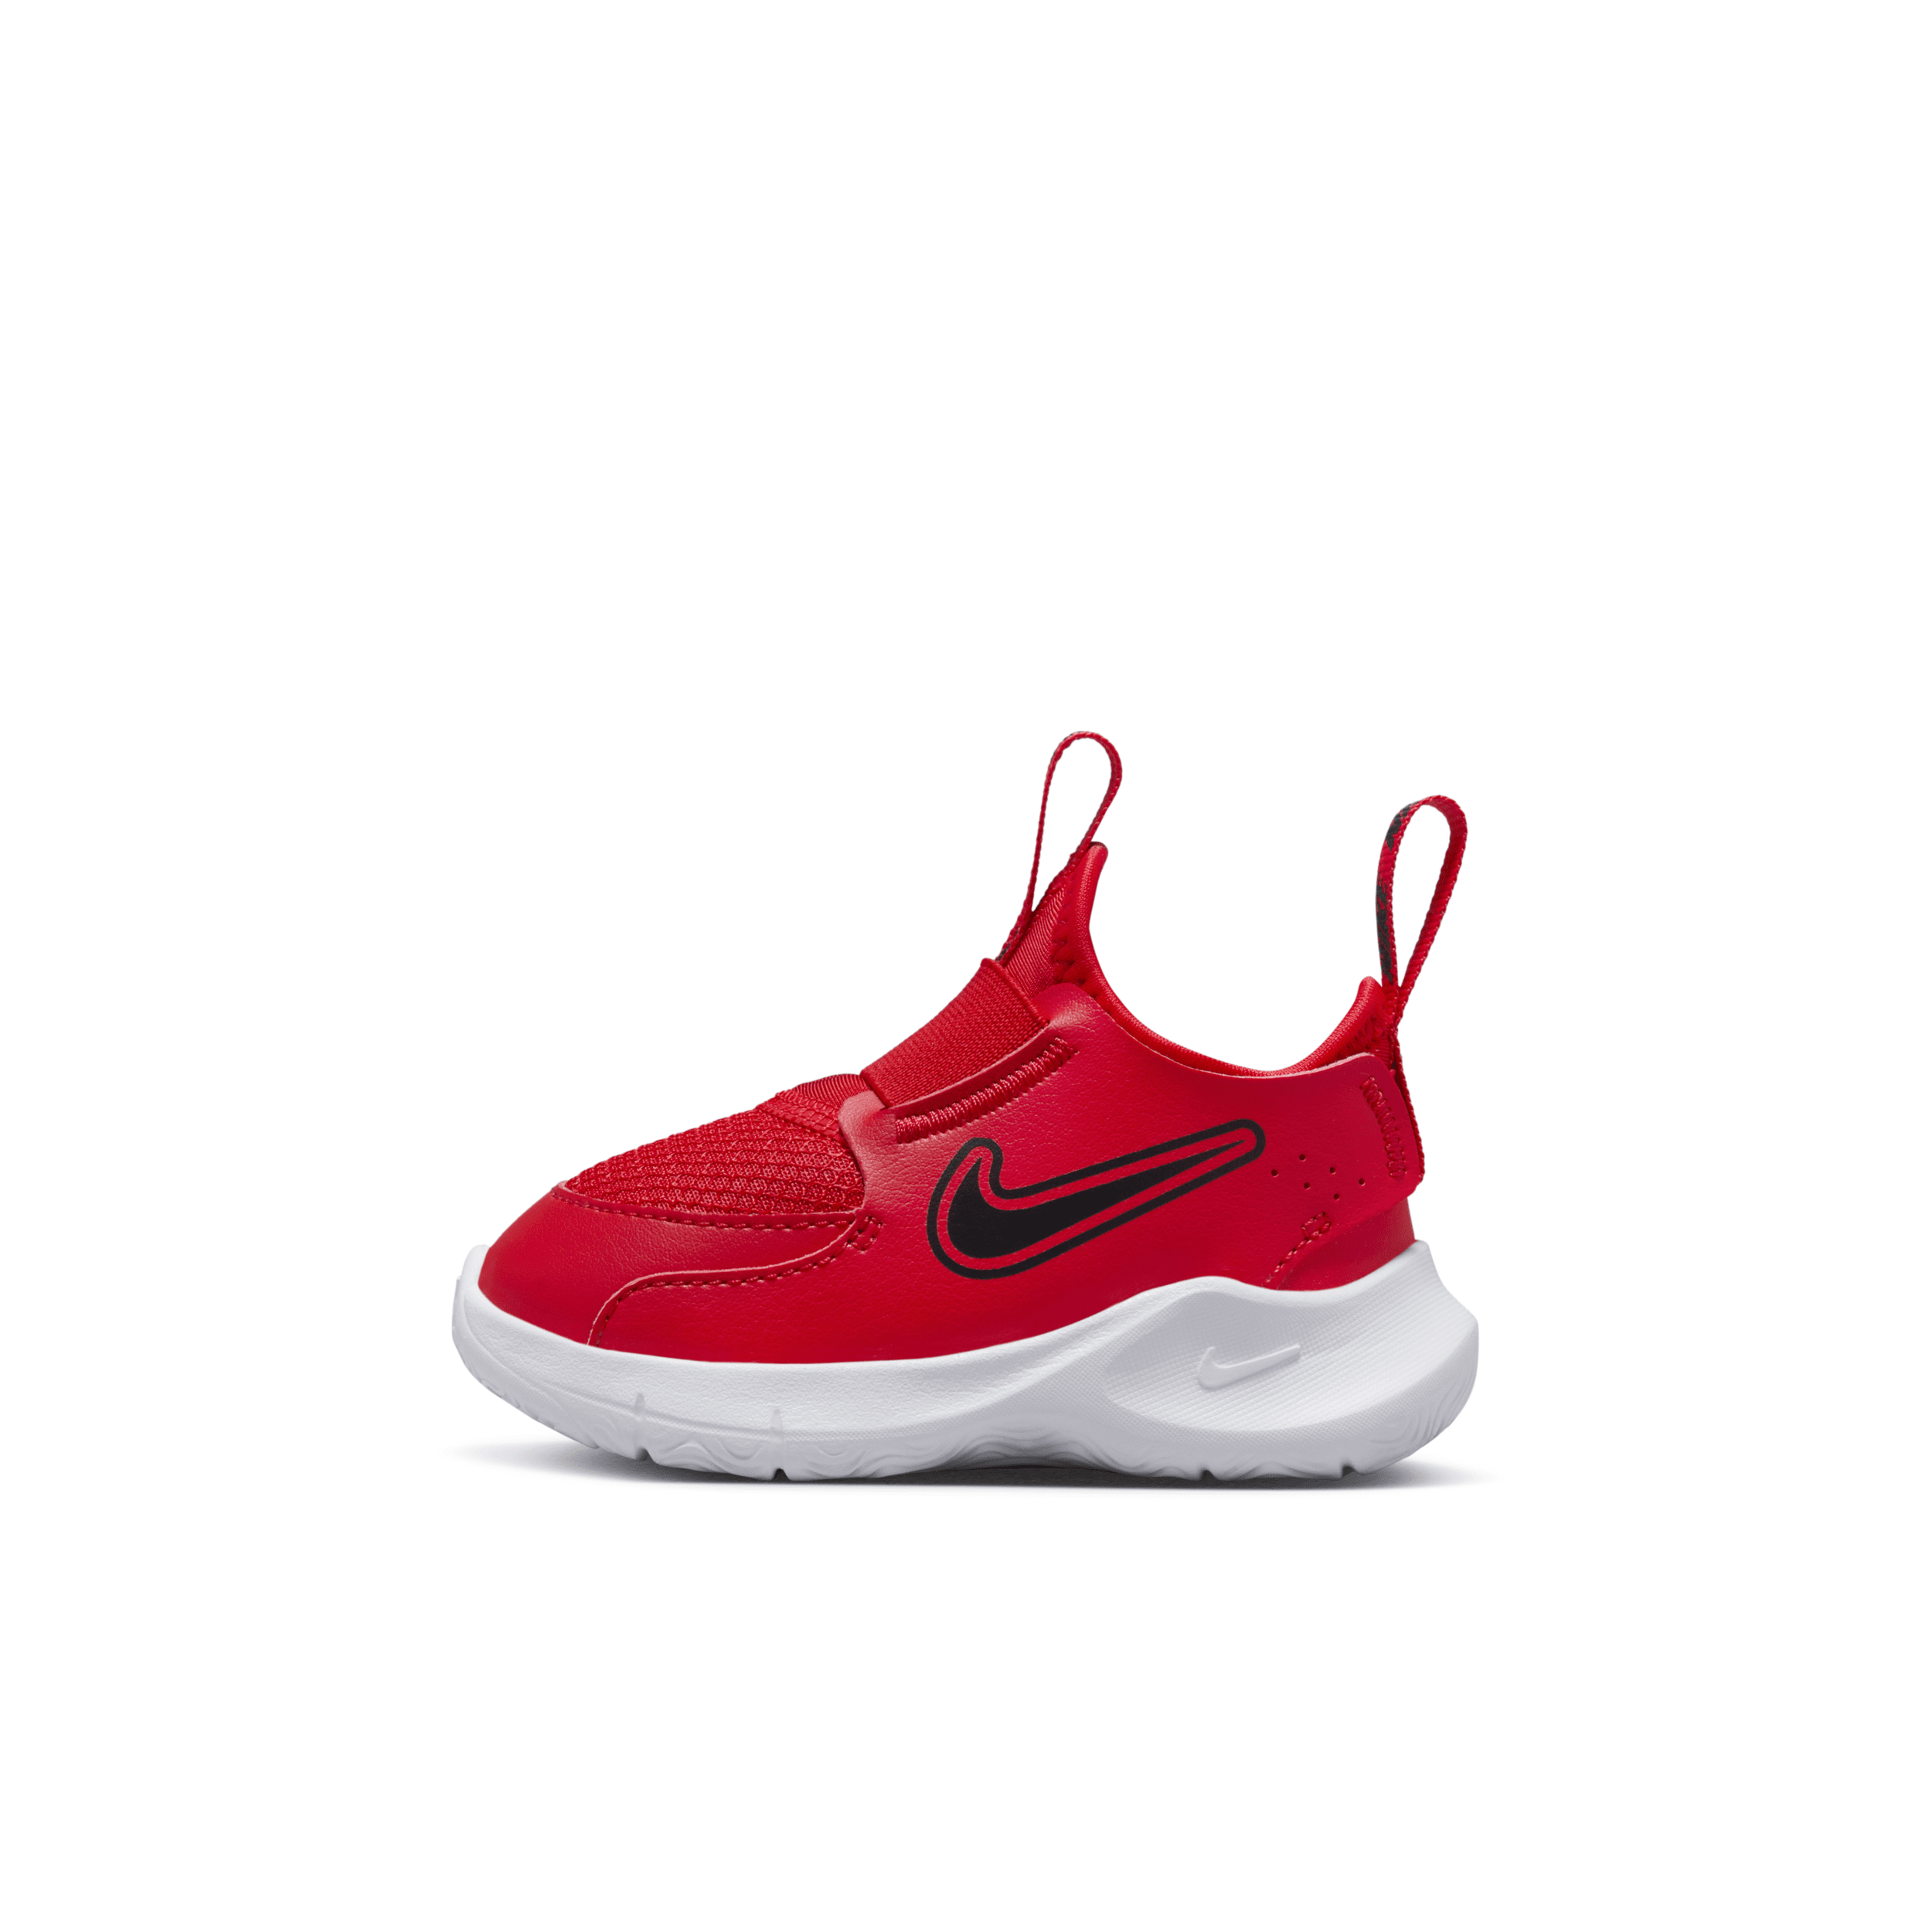 Nike Flex Runner 3 Baby/toddler Shoes In Red